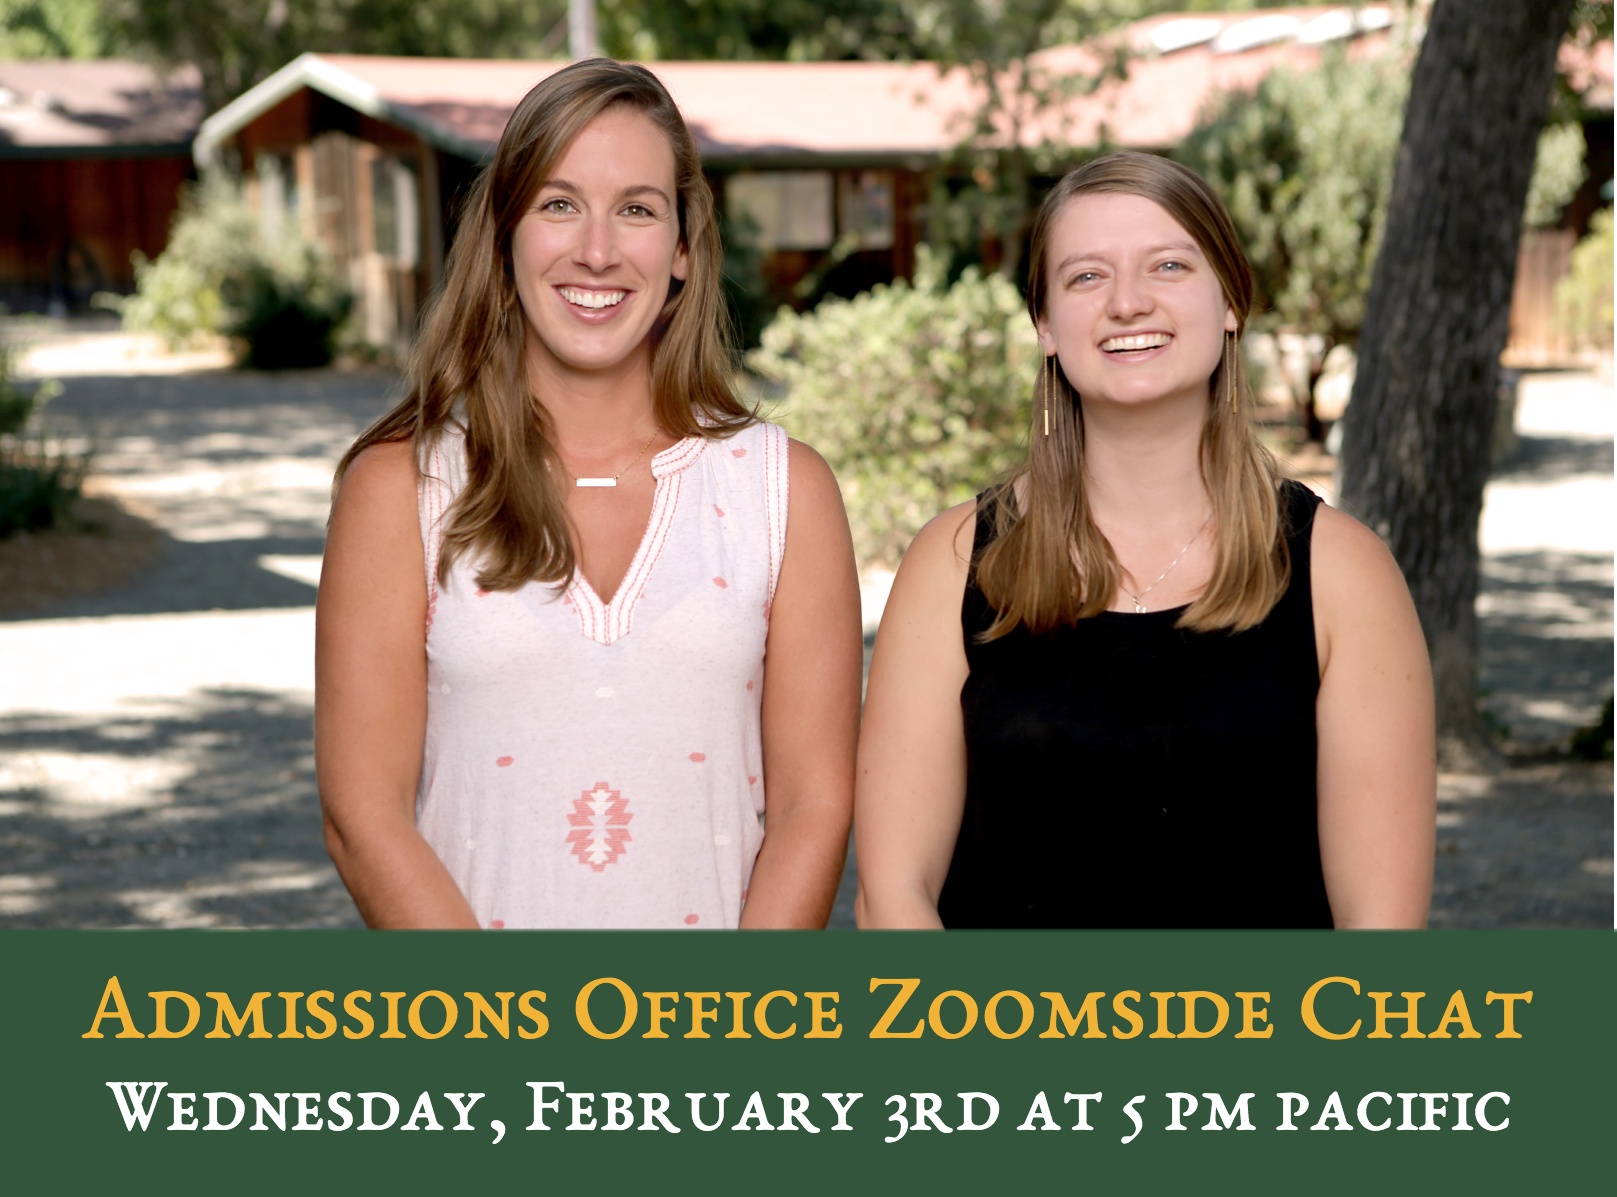 Zoomside Chat with the Admissions Team Wednesday, February 3 at 5 p.m. Pacific Time